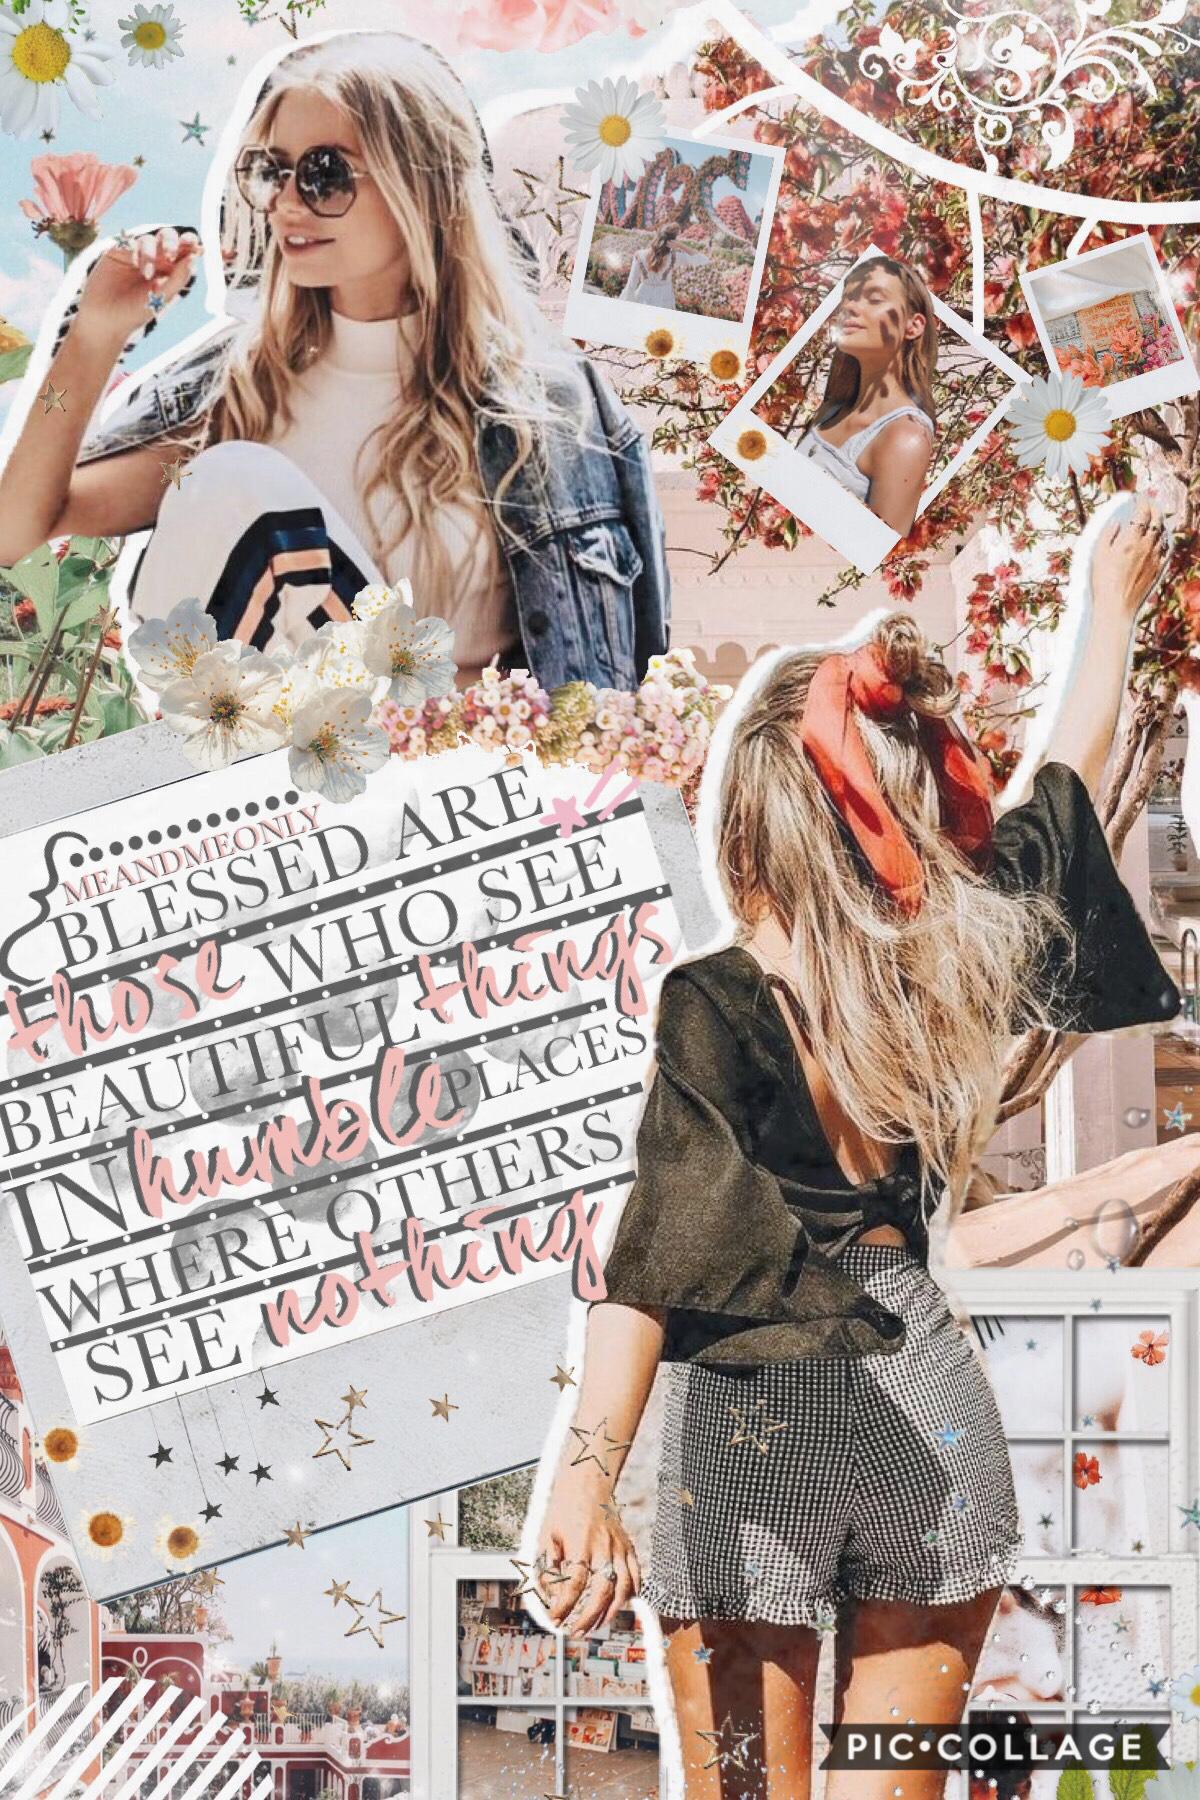 text inspo goes to @dreamcatcher4ever🌸sry this is a little messy. hope y’all had an amazing week🌿🧚‍♀️ also if you ever need anyone to talk to, I’m always open💗 
QOTD: do you prefer collages that feature the background or text? ✨🌼